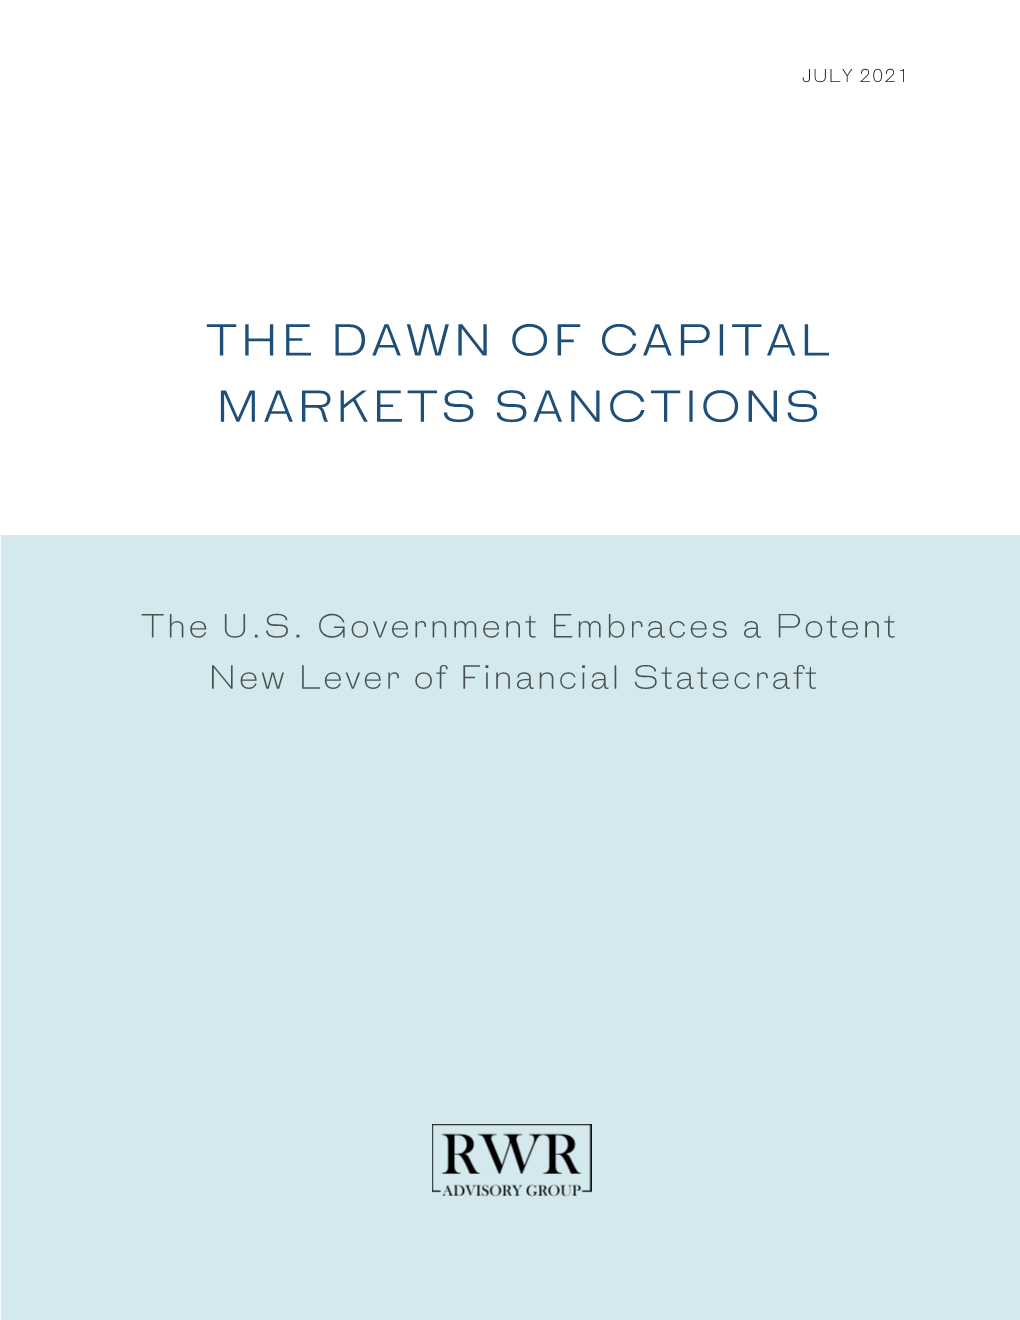 The Dawn of Capital Markets Sanctions